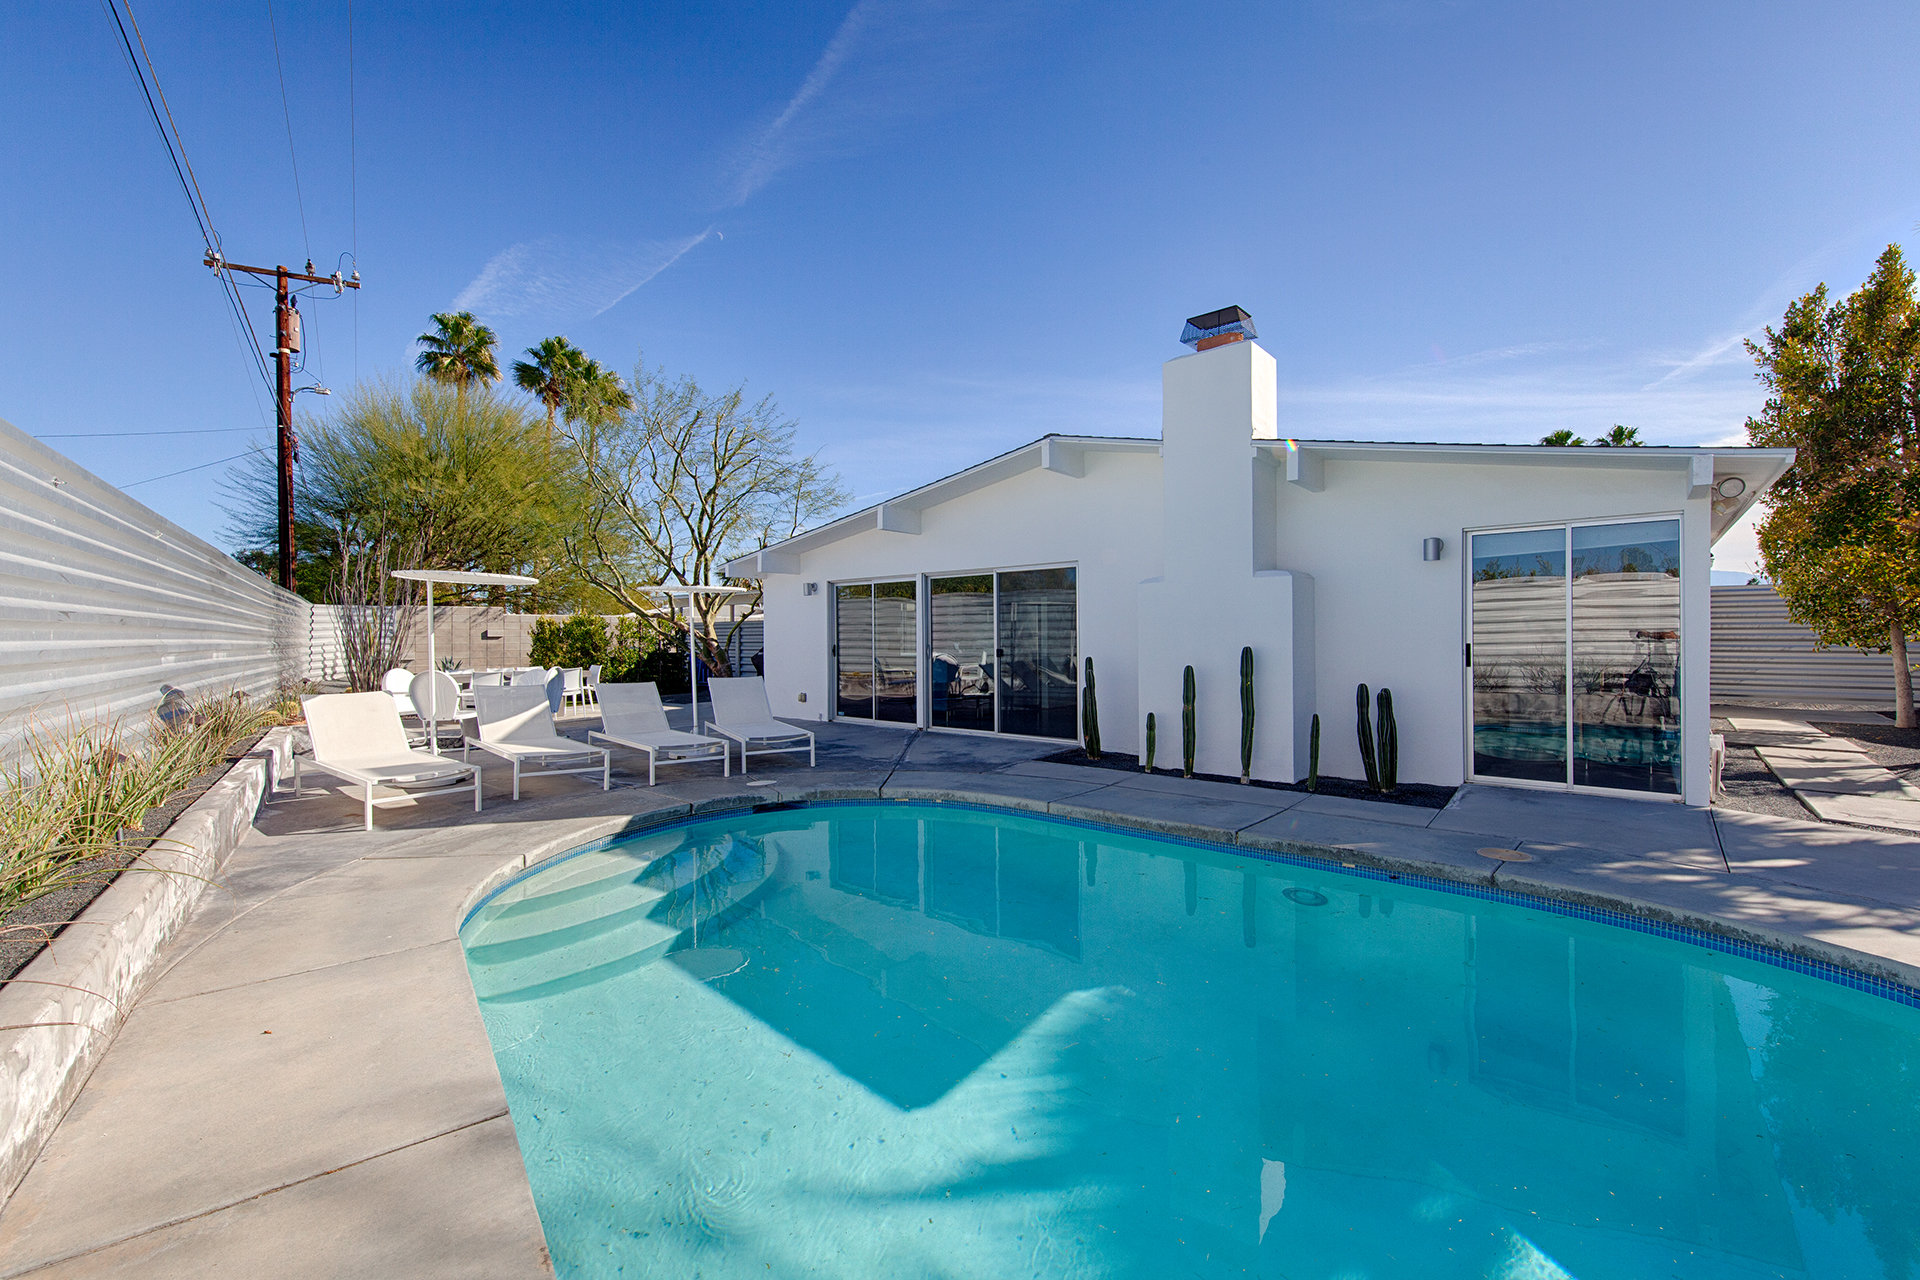 The beautiful backyard of an Alexander built home in Racquet Club Estates in Palm Springs, CA.